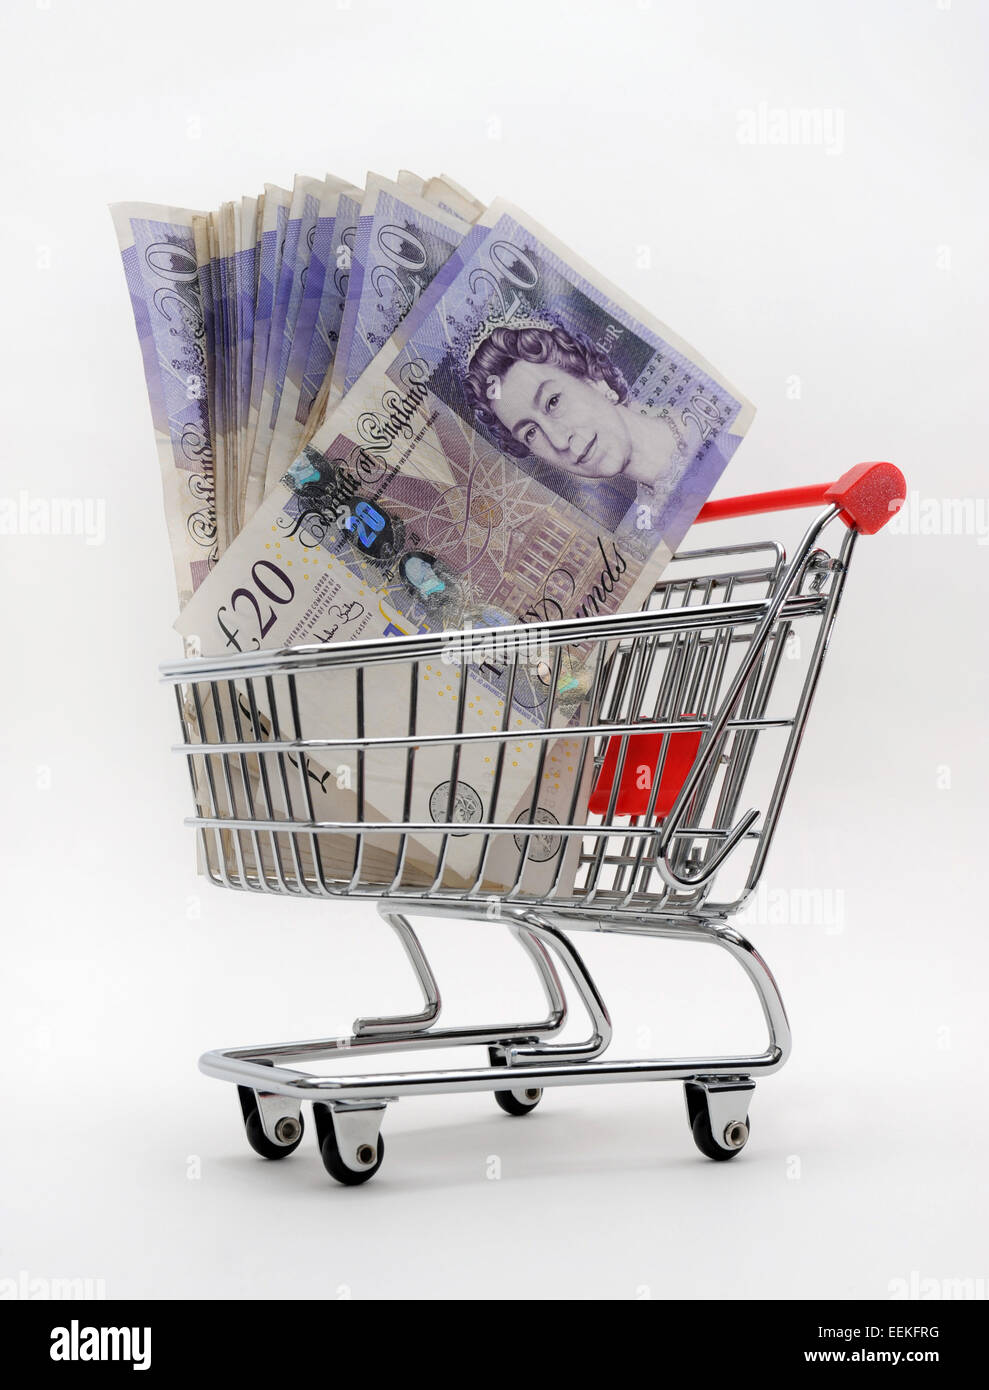 SUPERMARKET TROLLEY WITH £20 NOTES RE SUPERMARKETS FOOD PRICES COSTS HOUSEHOLD BUDGETS PENSION PROVIDER COMPANY SAVINGS CASH UK Stock Photo